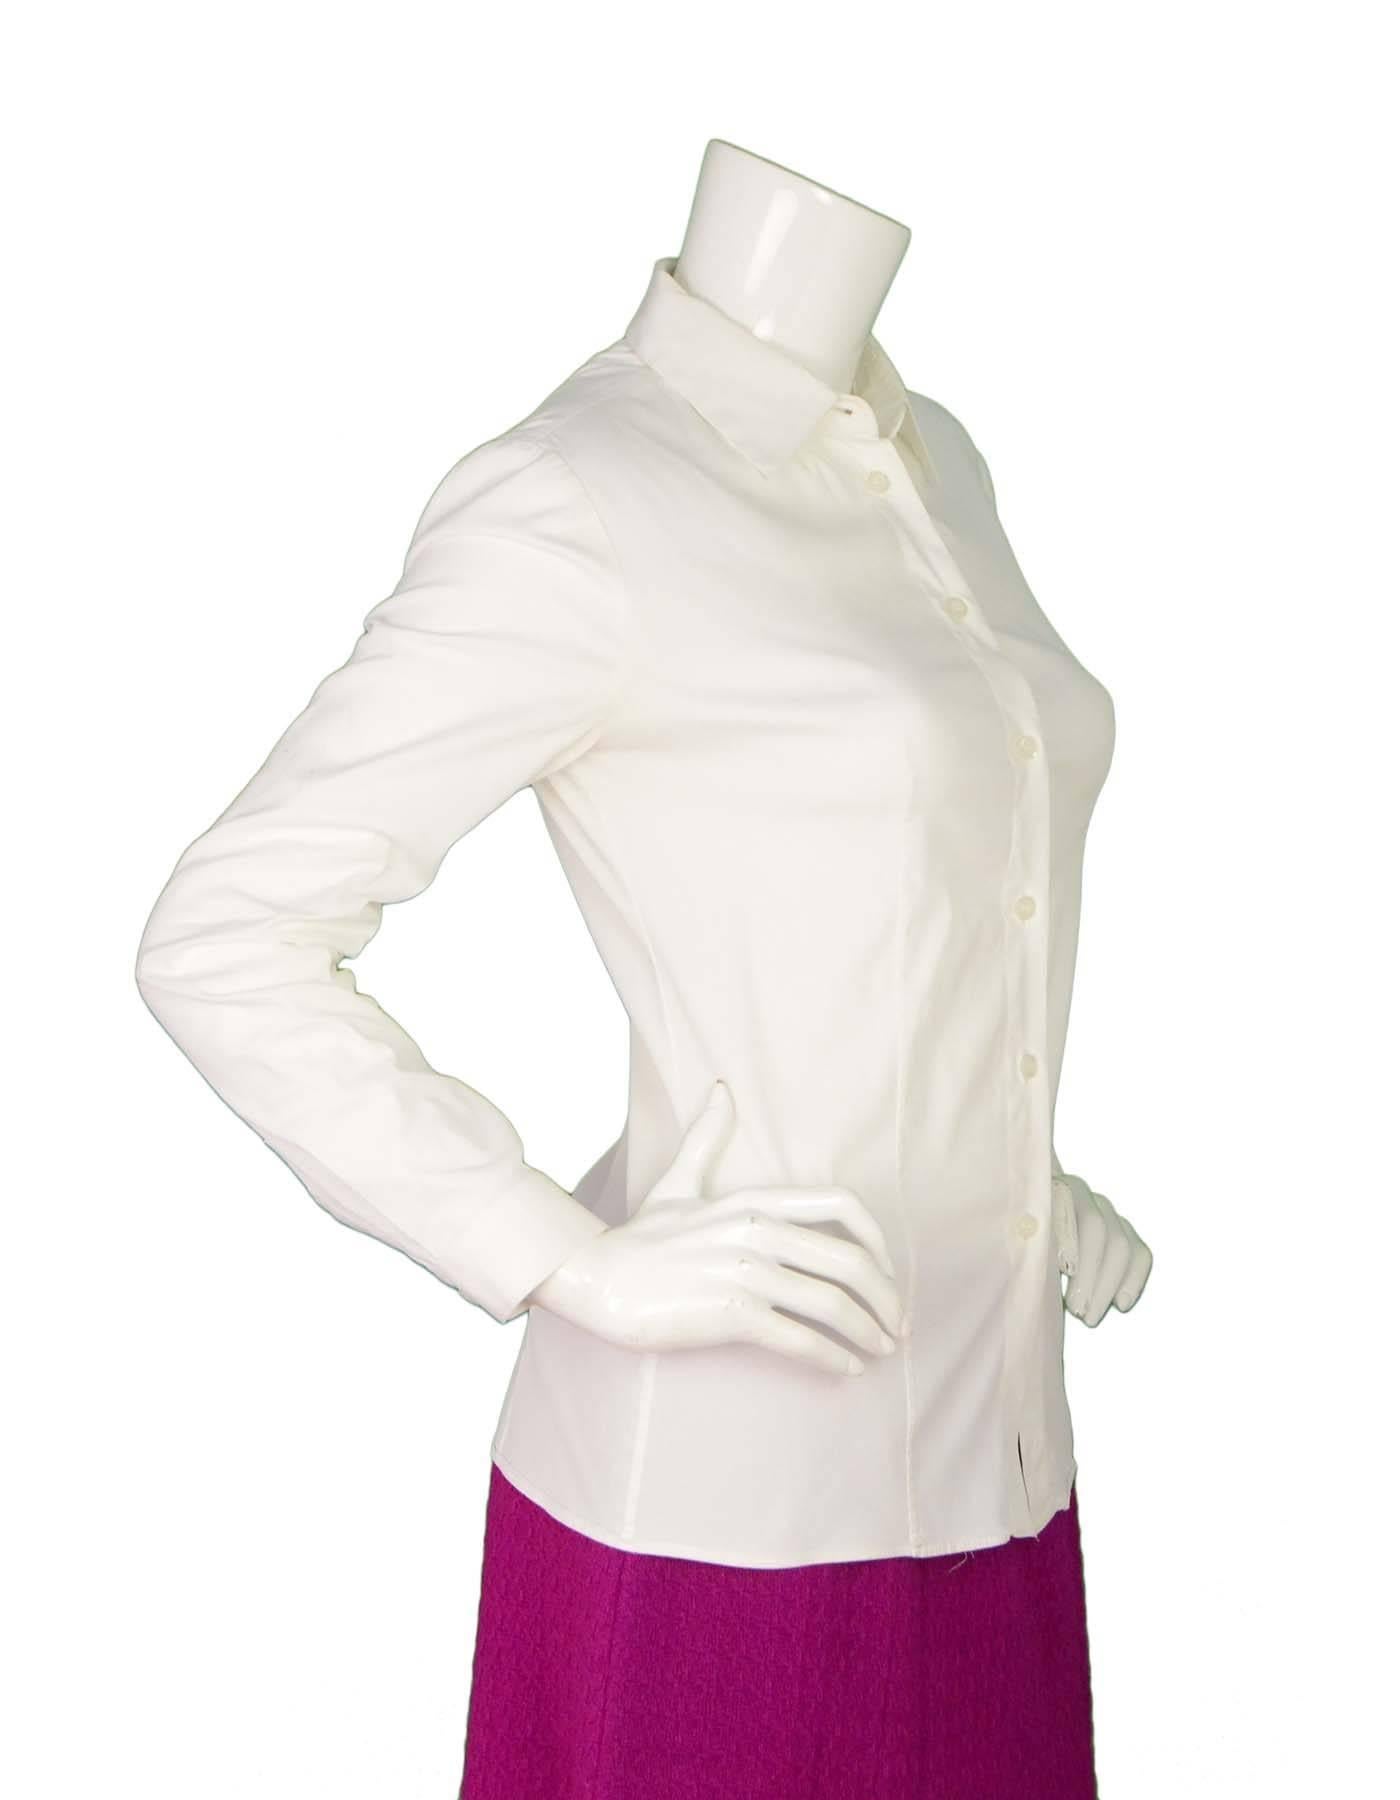 Prada White Button Up Top Sz 38

Color: White
Composition: Not listed, believed to be cotton blend
Lining: None
Closure/Opening: Button closure at front
Overall Condition: Very good pre-owned condition with faint marks at sleeves

Marked